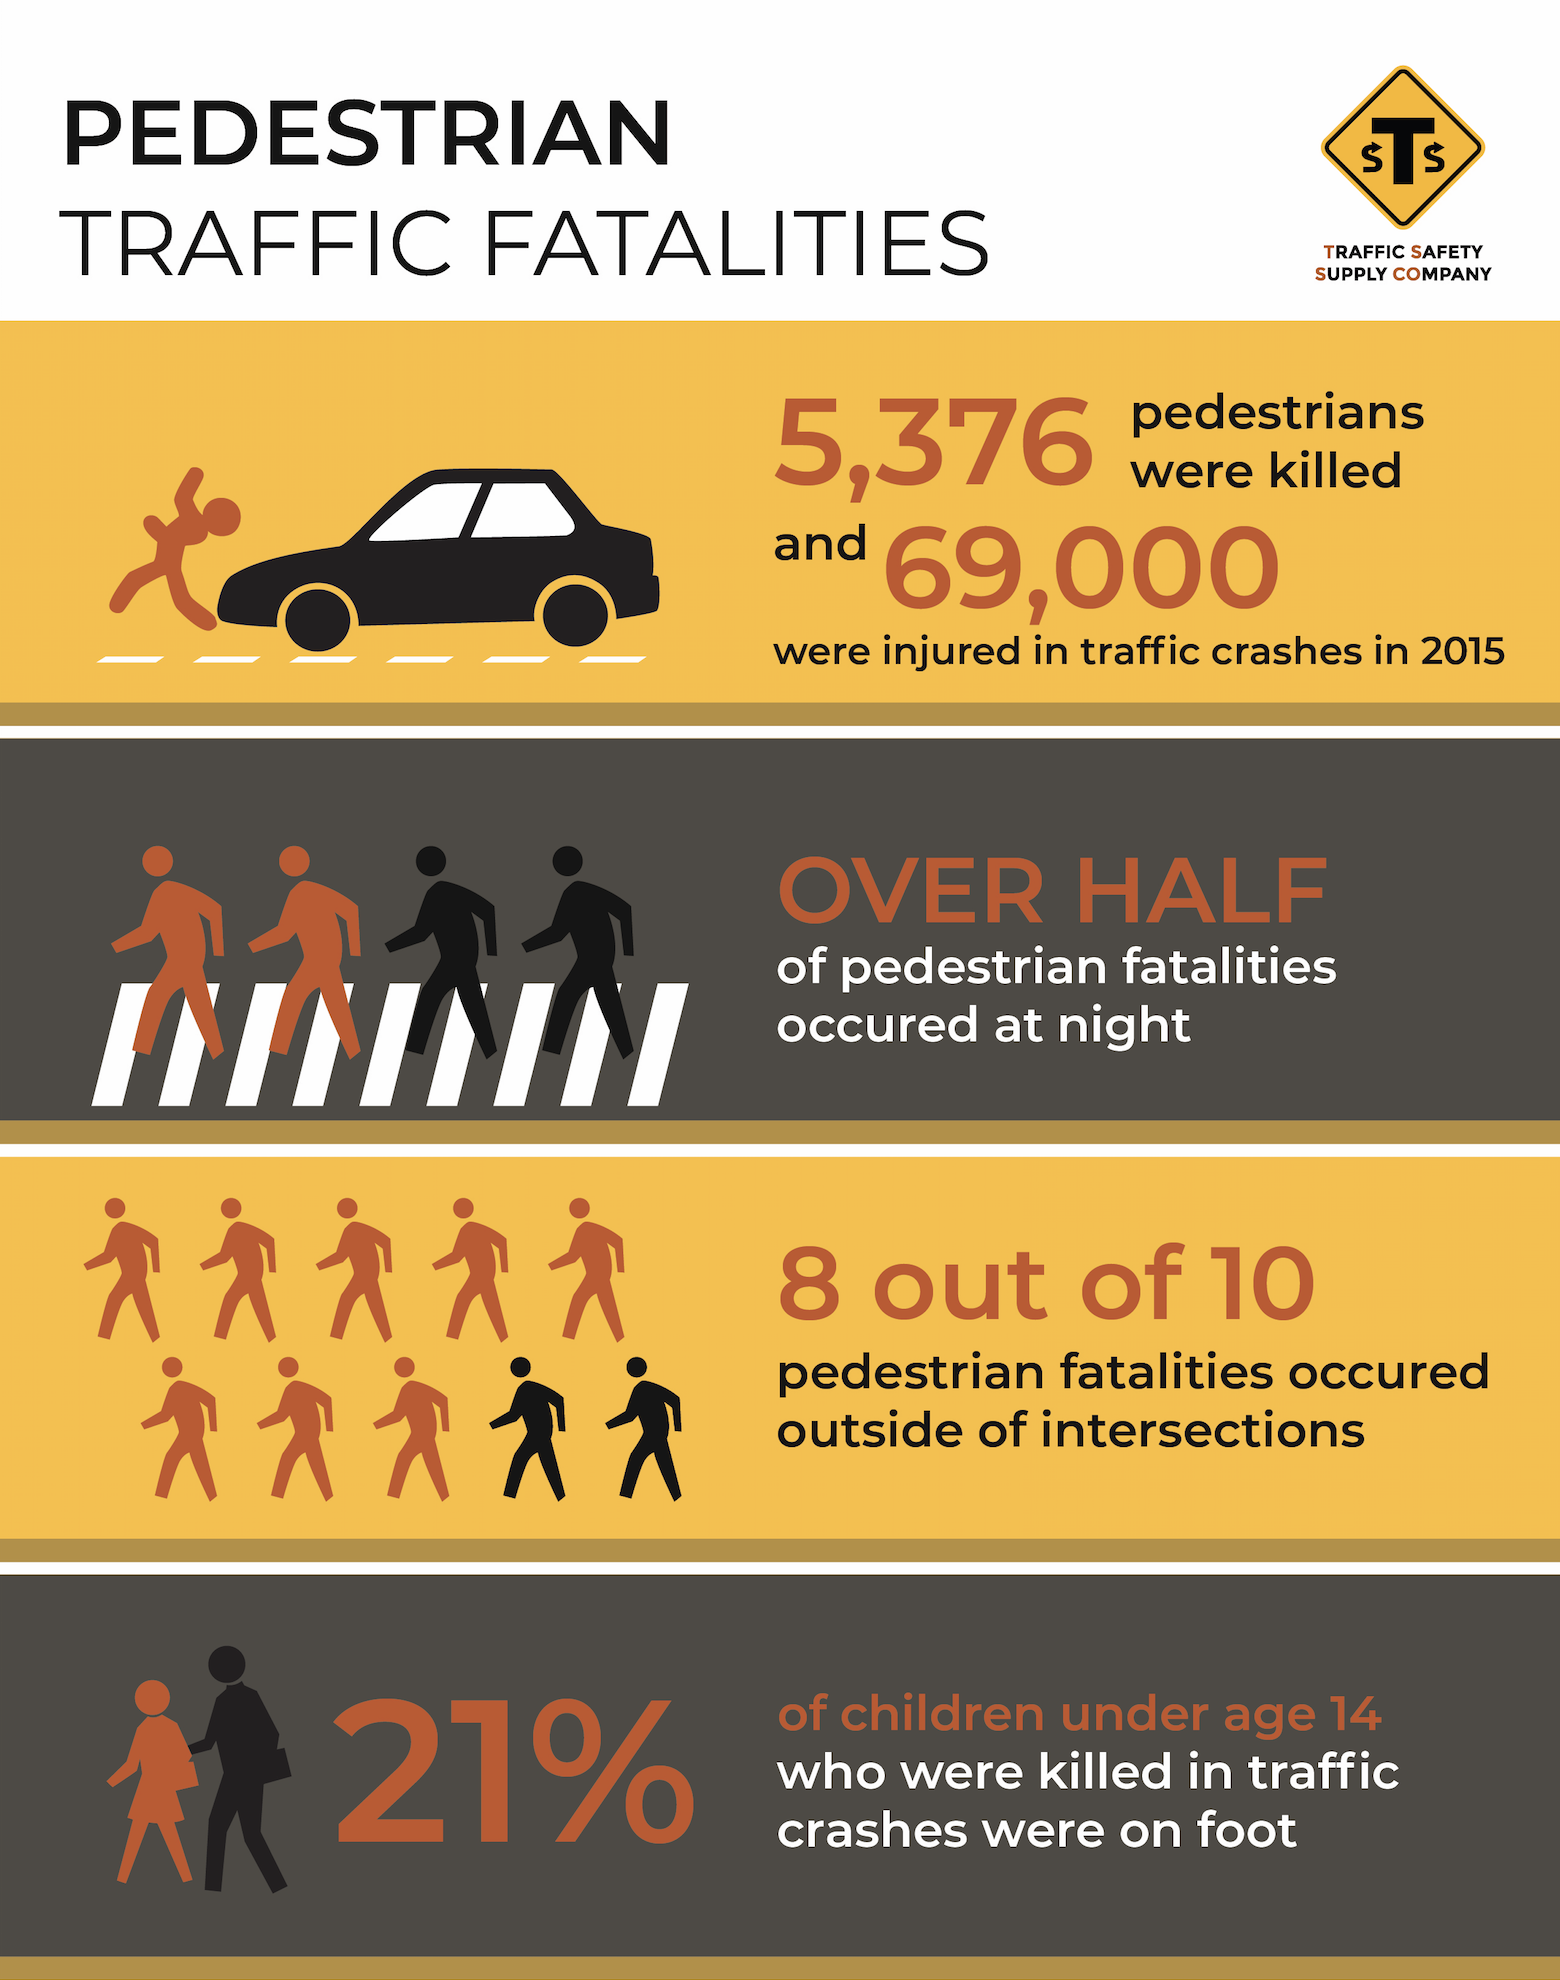 Road Rules for Pedestrians: Crossing, Safety and Right-of-Way